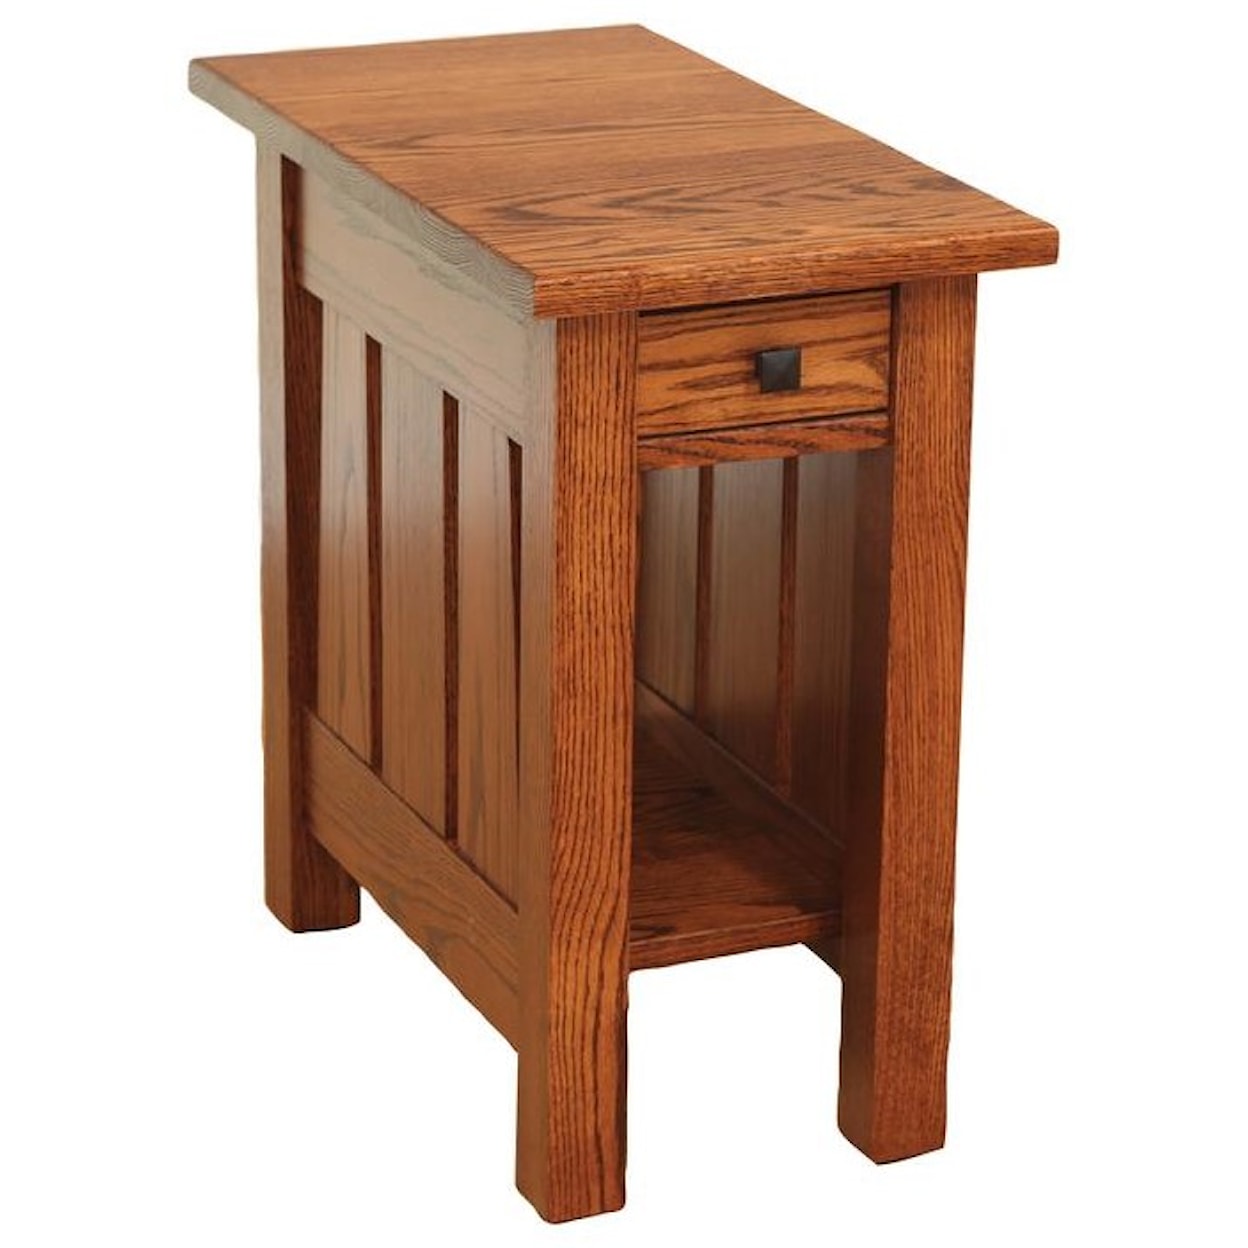 Hopewood Canted Mission Chairside Table